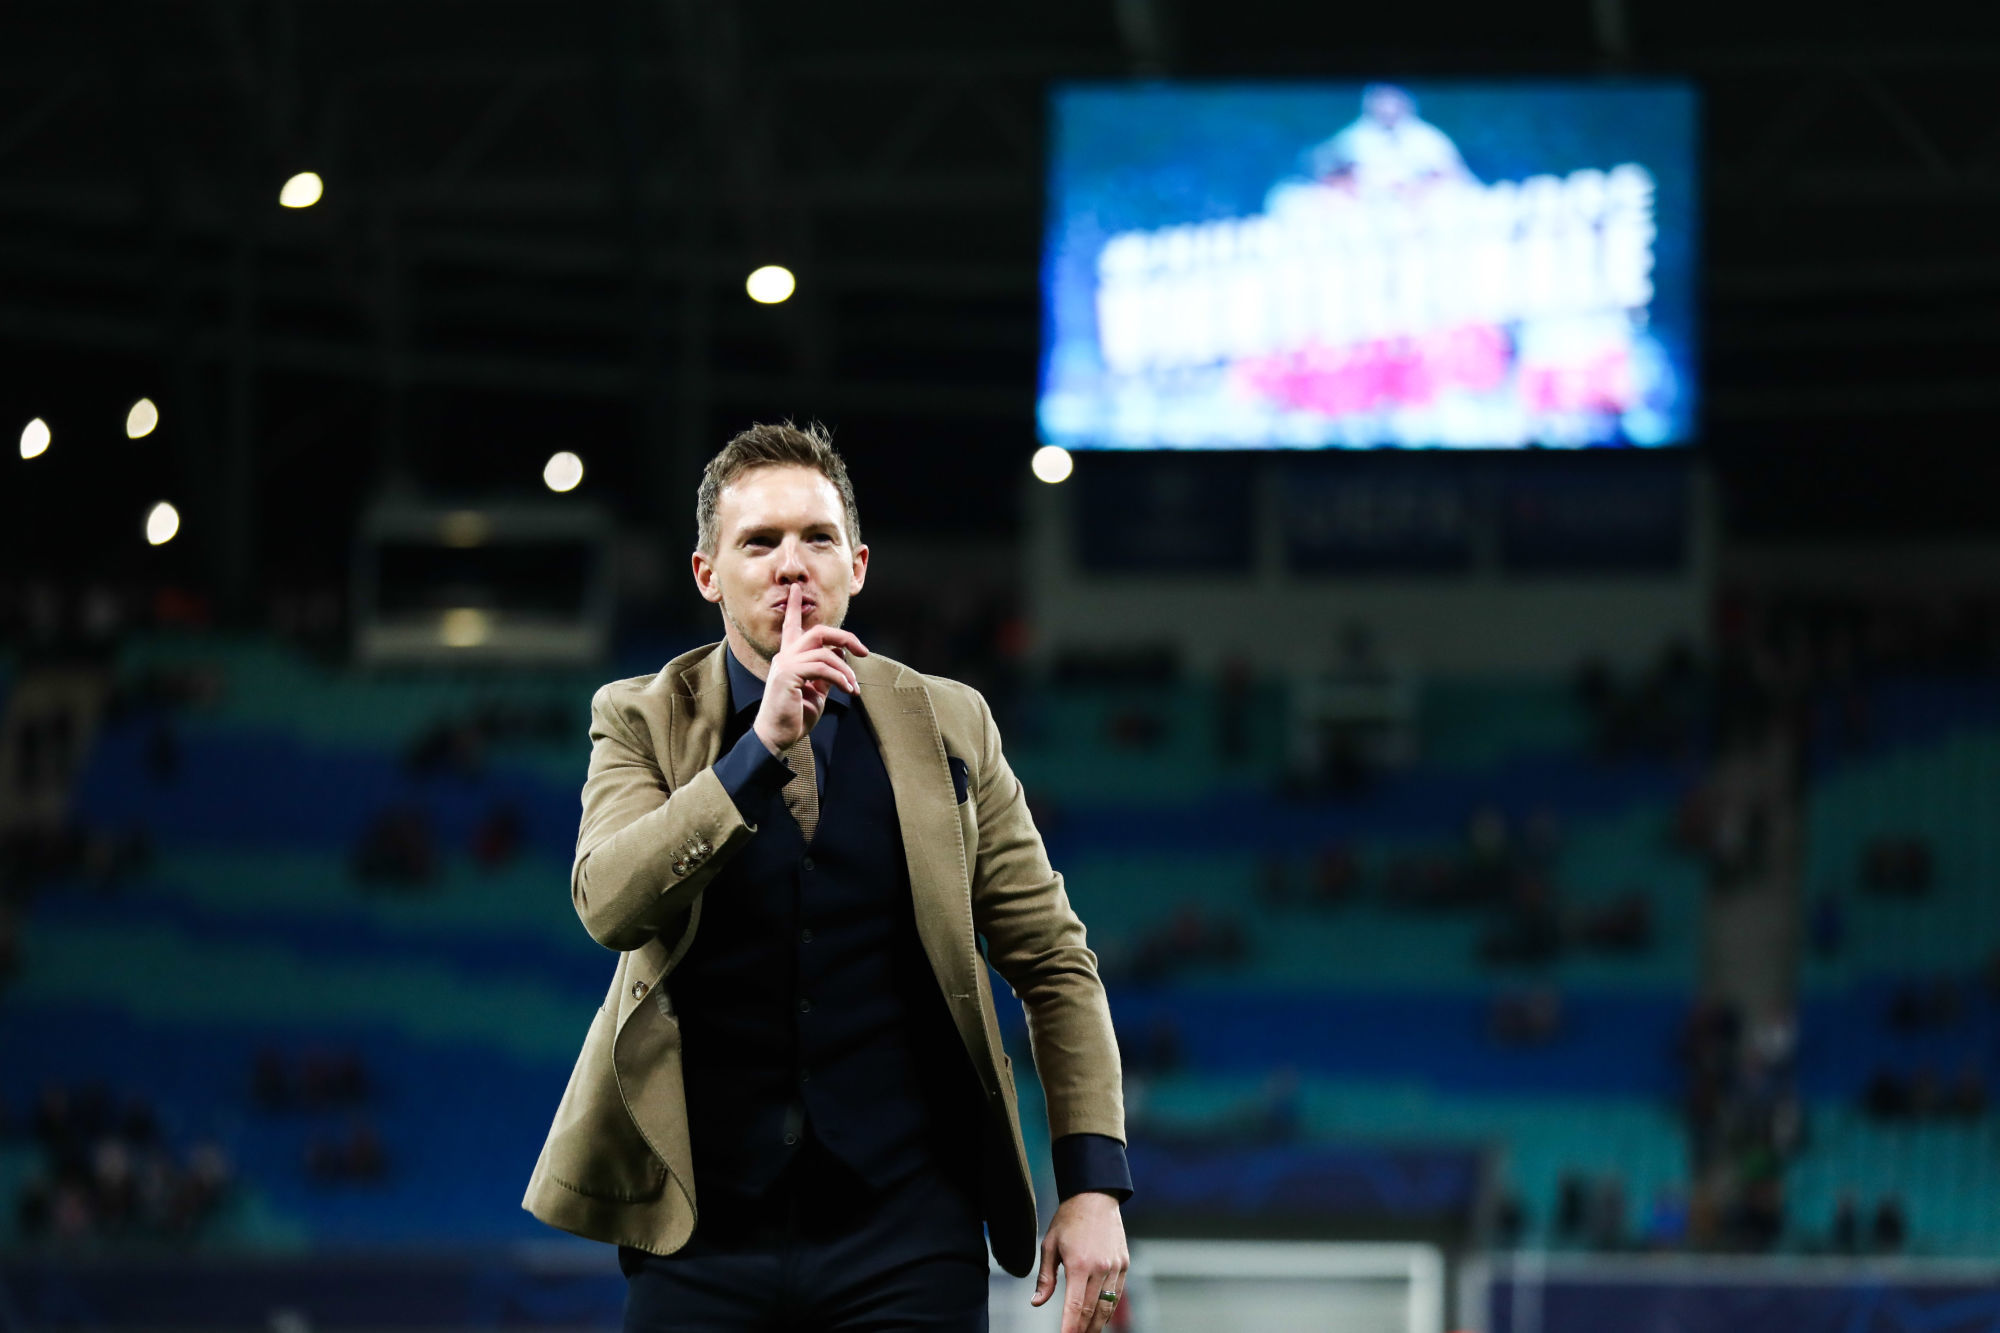 10 March 2020, Saxony, Leipzig: Football: Champions League, knockout round, round of 16, second leg: RB Leipzig - Tottenham Hotspur in the Red Bull Arena. Leipzig's coach Julian Nagelsmann cheers on his team's 3-0 victory. RB Leipzig has reached the quarter-finals of the Champions League and celebrated the biggest success in the club's history so far. Photo: Jan Woitas/dpa-Zentralbild/dpa 

Photo by Icon Sport - Julian NAGELSMANN - Red Bull Arena - Leipzig (Allemagne)